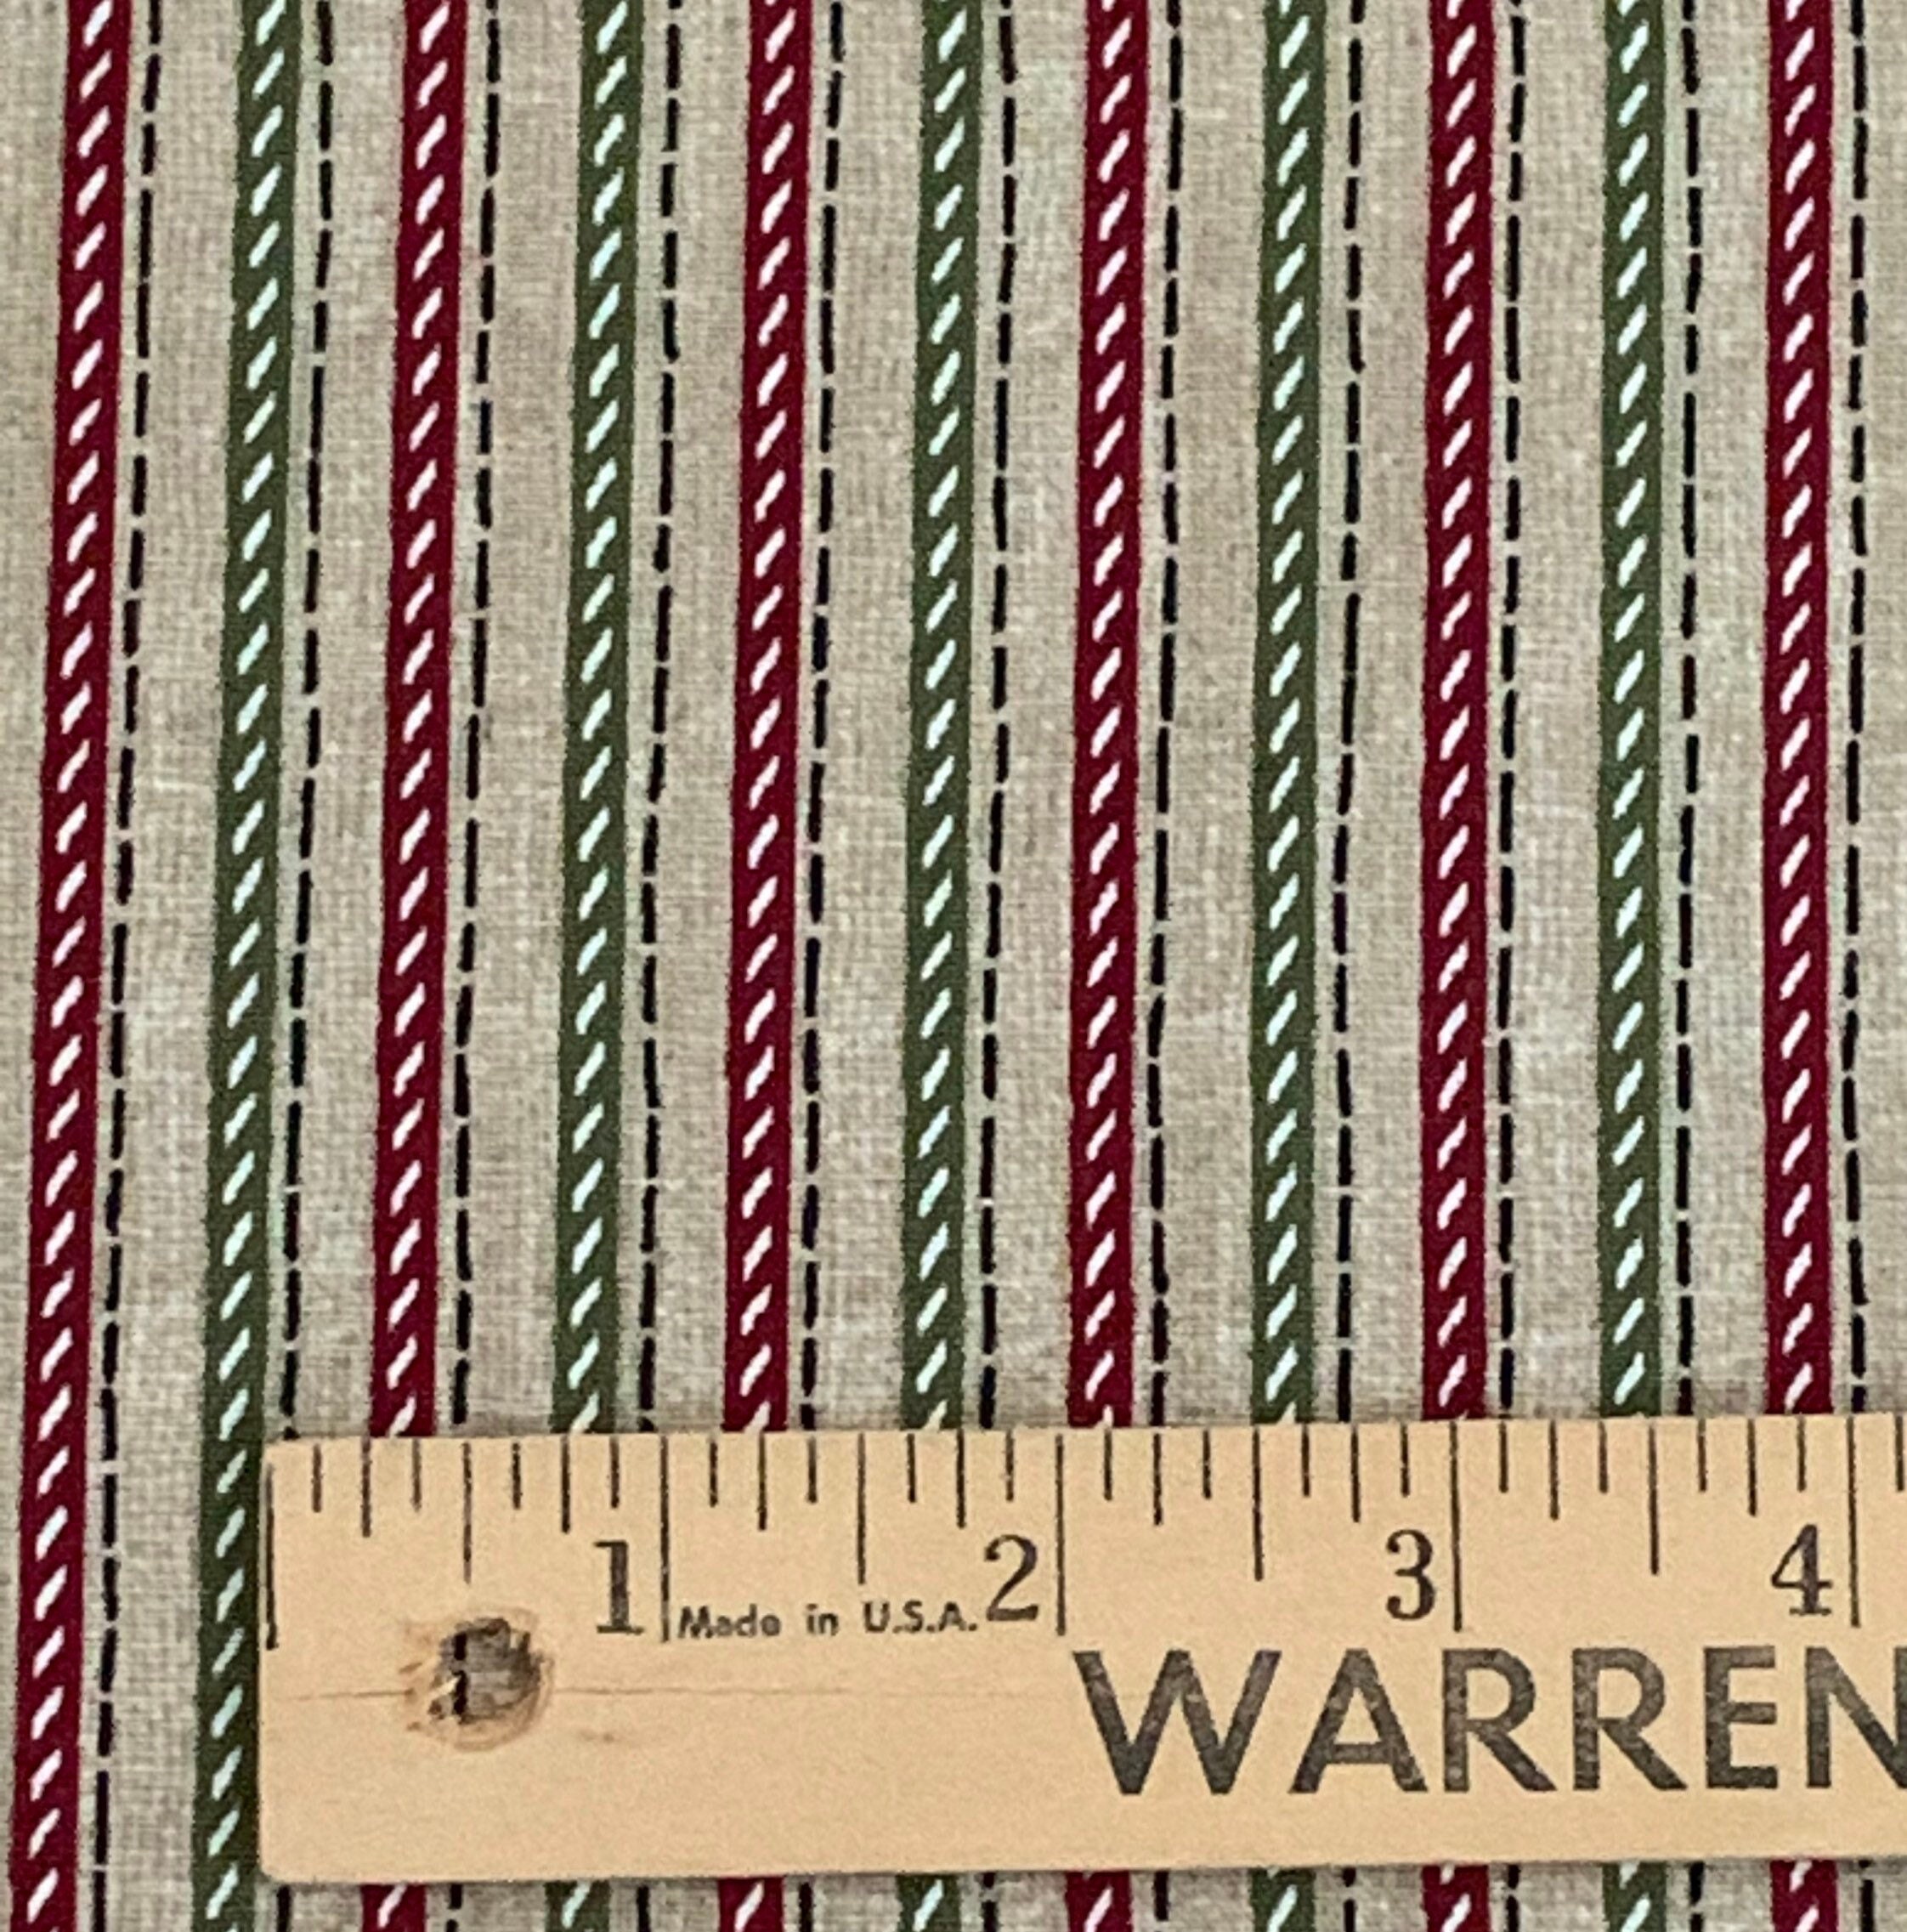 Papa Noel Christmas Stripe Multicolor 100% Cotton Fabric by The Yard